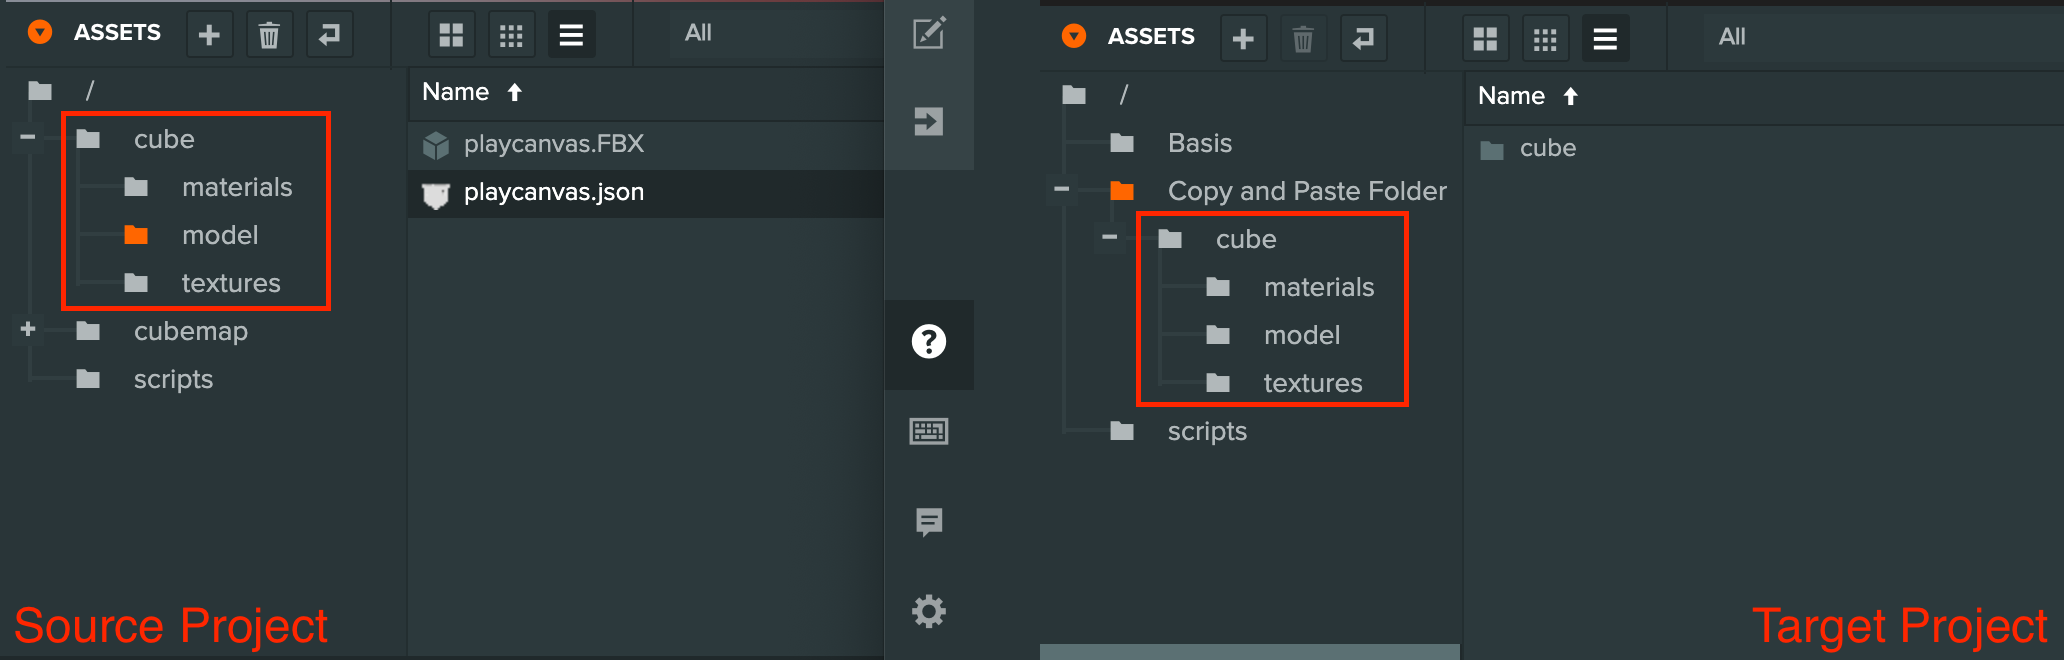 Pasted referenced assets with folders